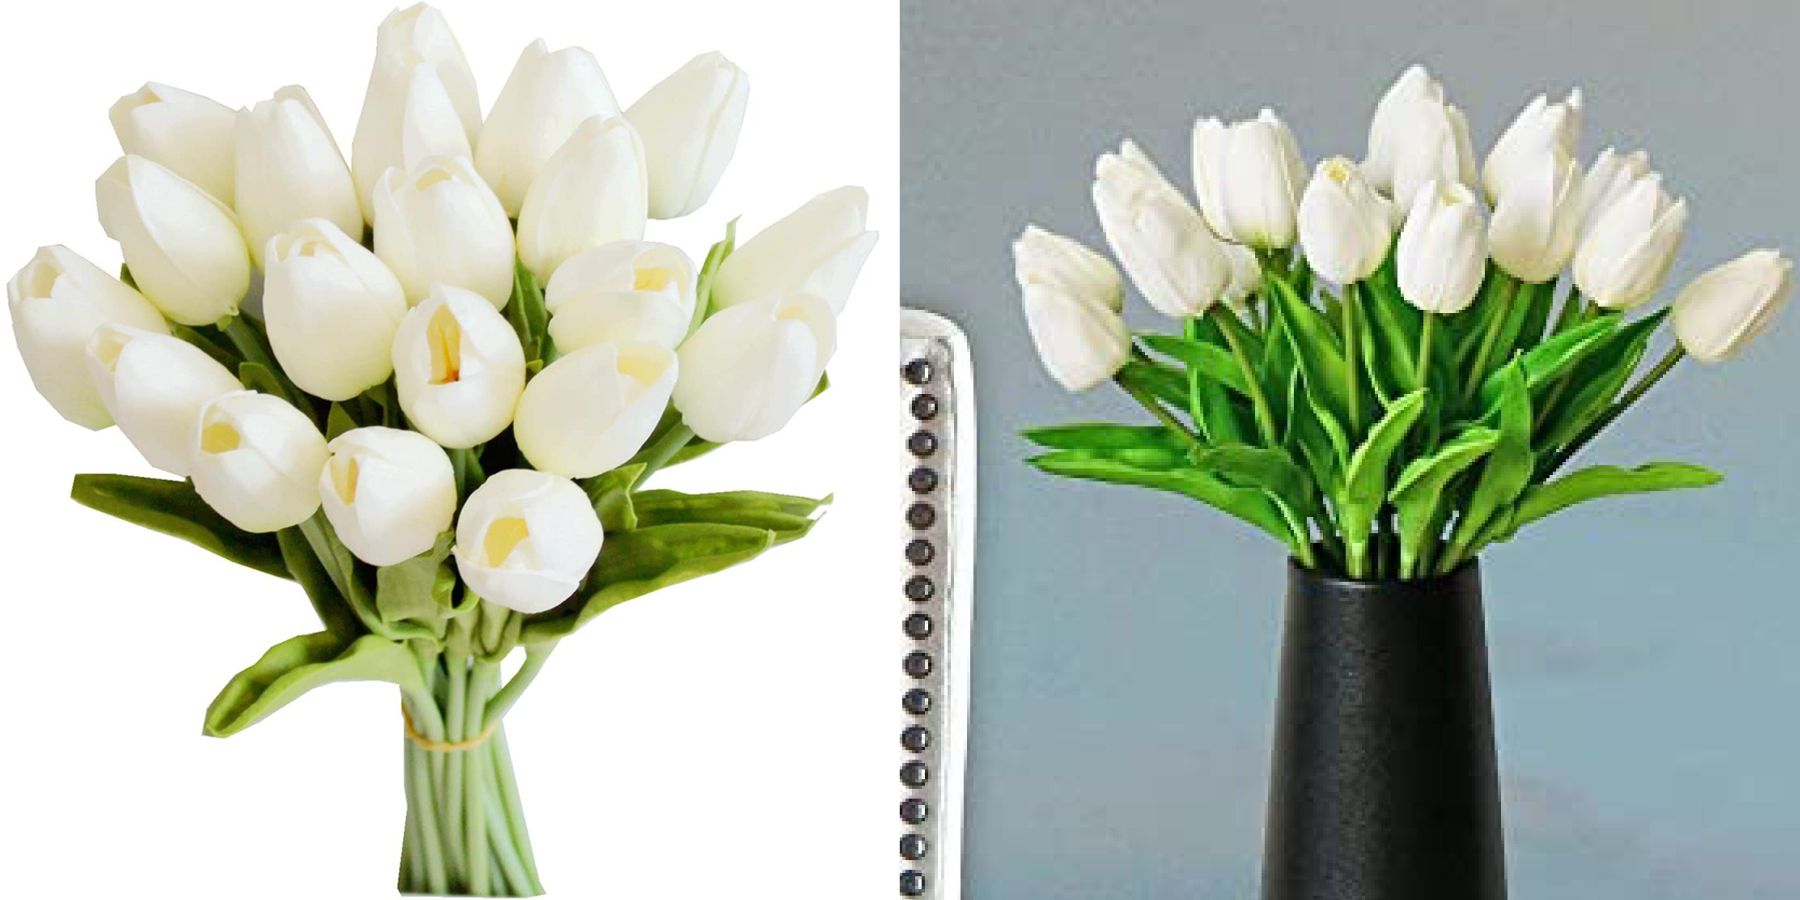 15 Best Artificial Flowers - Where to Buy Realistic Fake Flowers